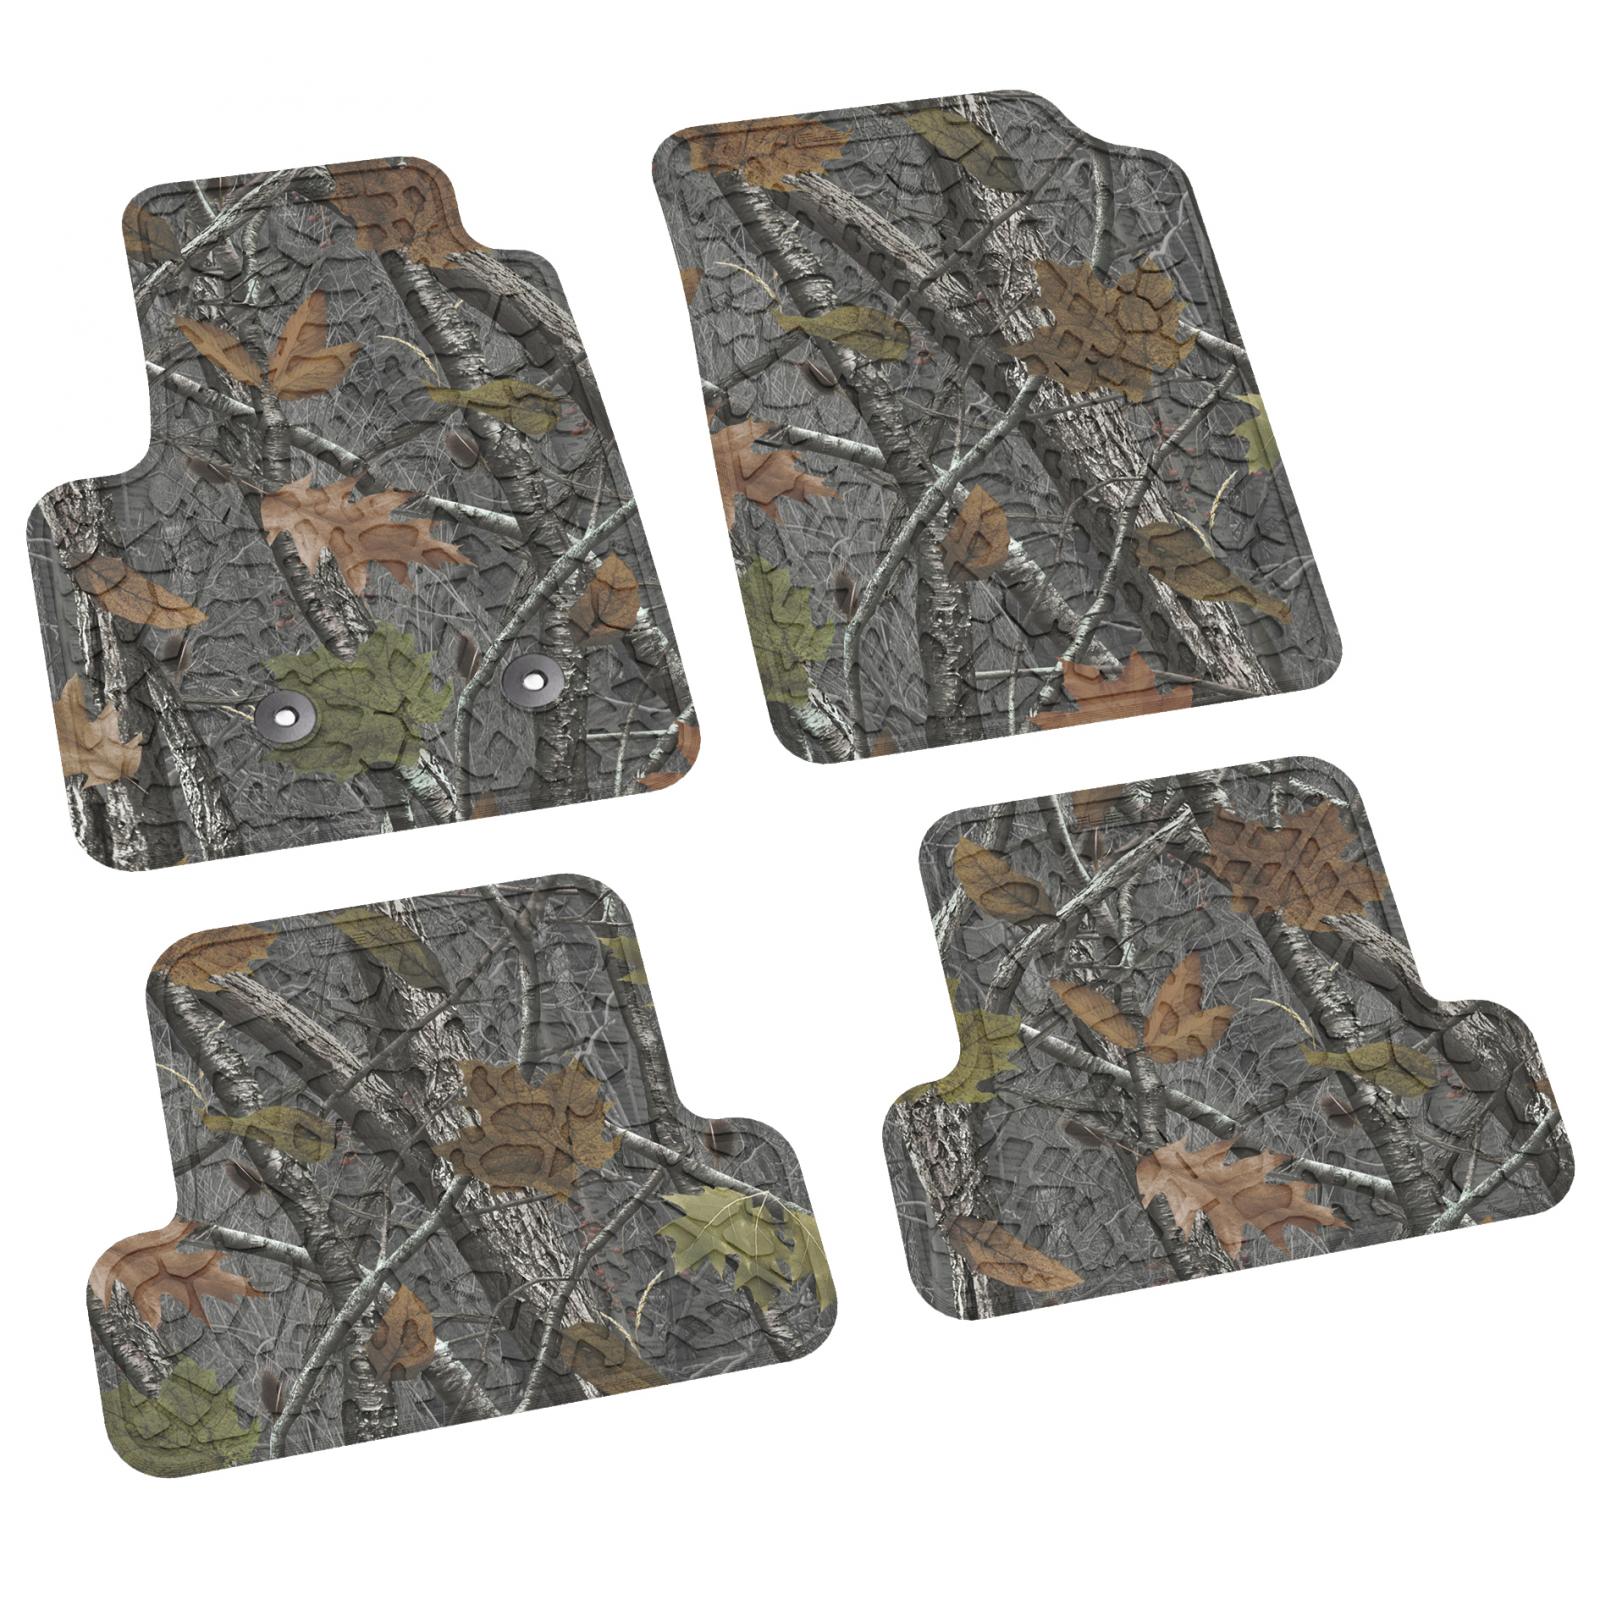 Colorado/Canyon Floor Mats 15-22 Colorado/Canyon Extended Crew Cab 4 Piece Tire Tread/Scorched Earth Scene - Rugged Woods FlexTread